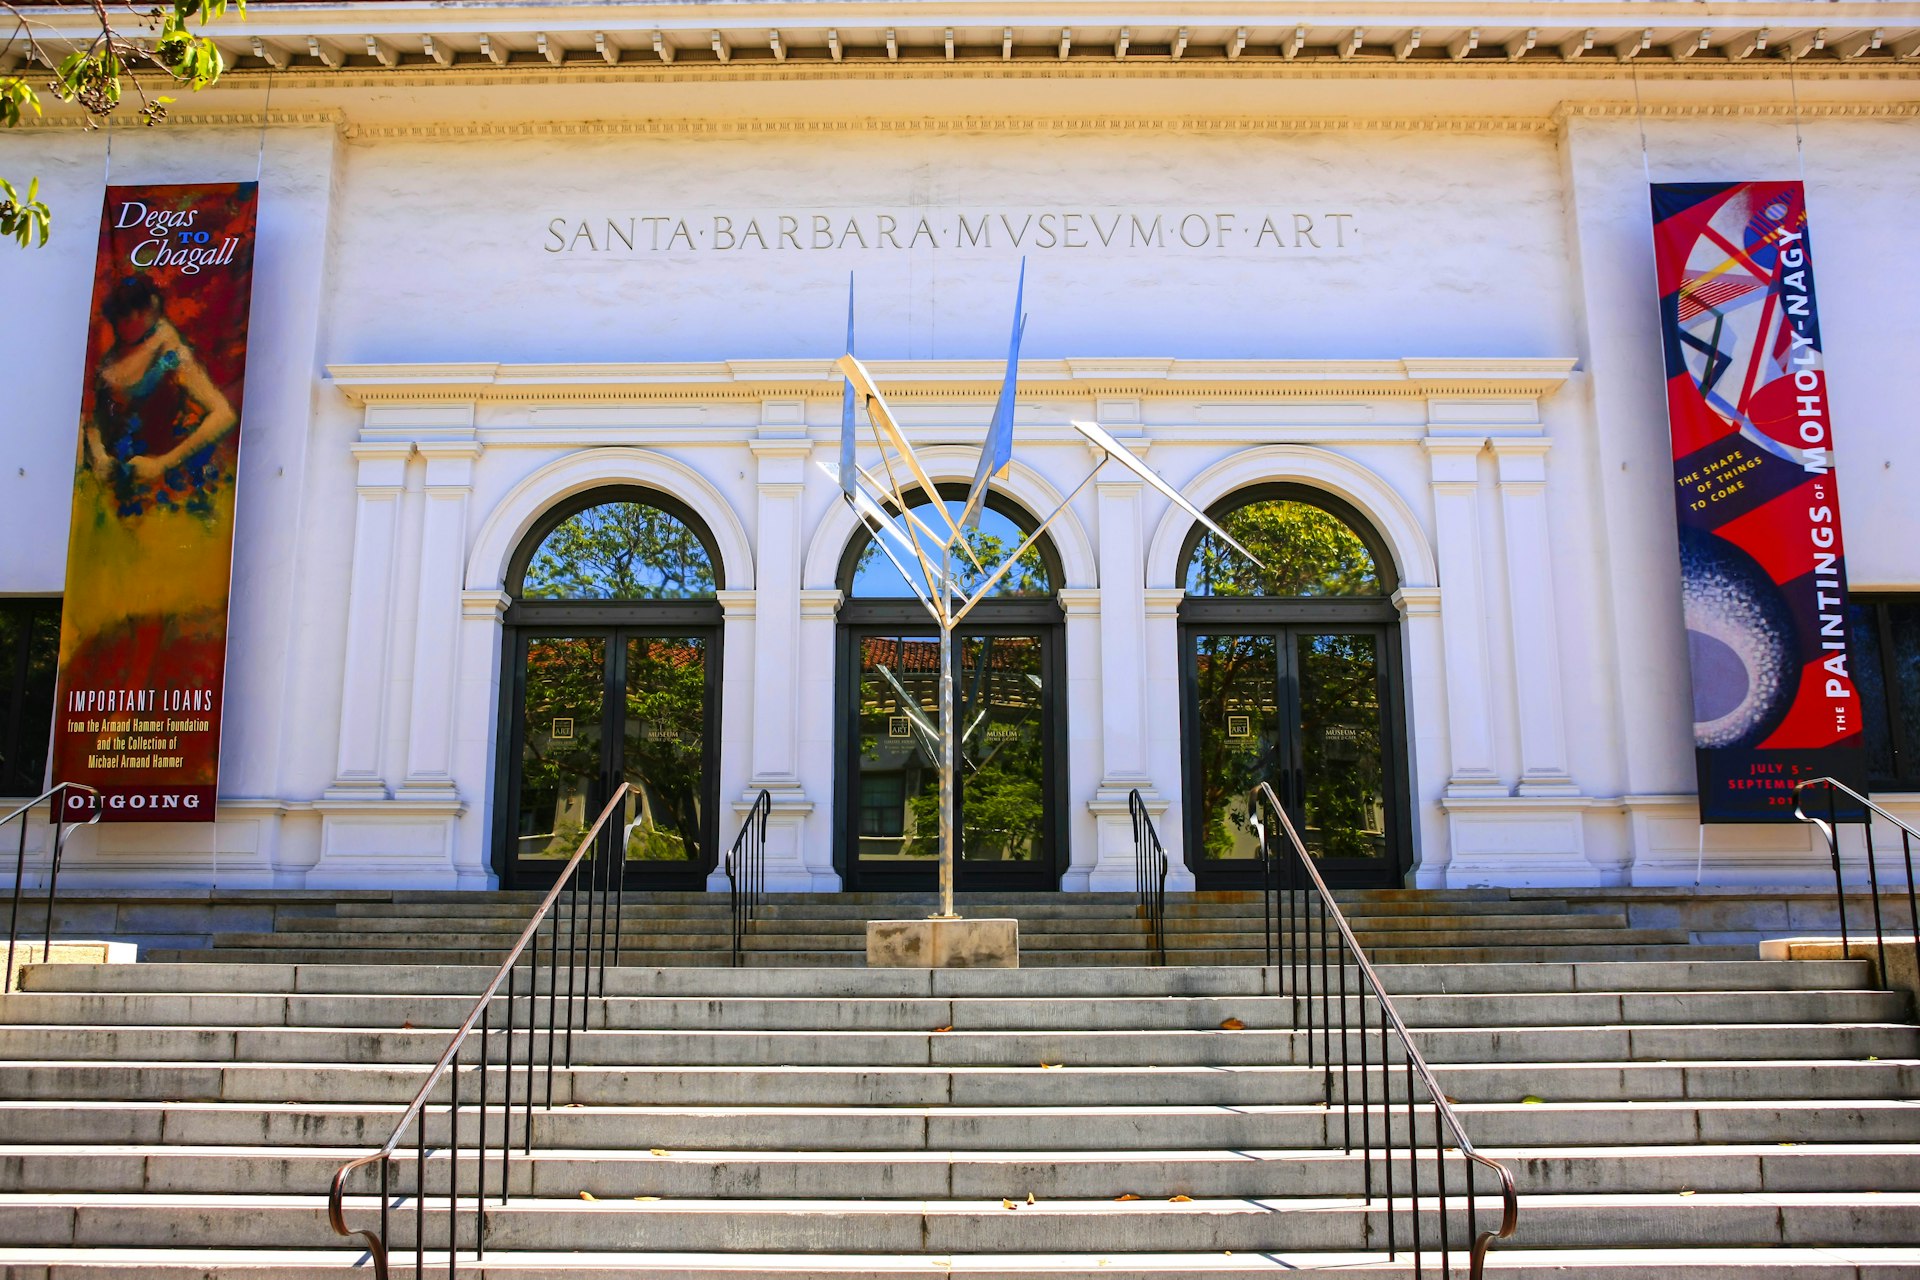 The mission-style façade and front steps of the Santa Barbara Museum of Art